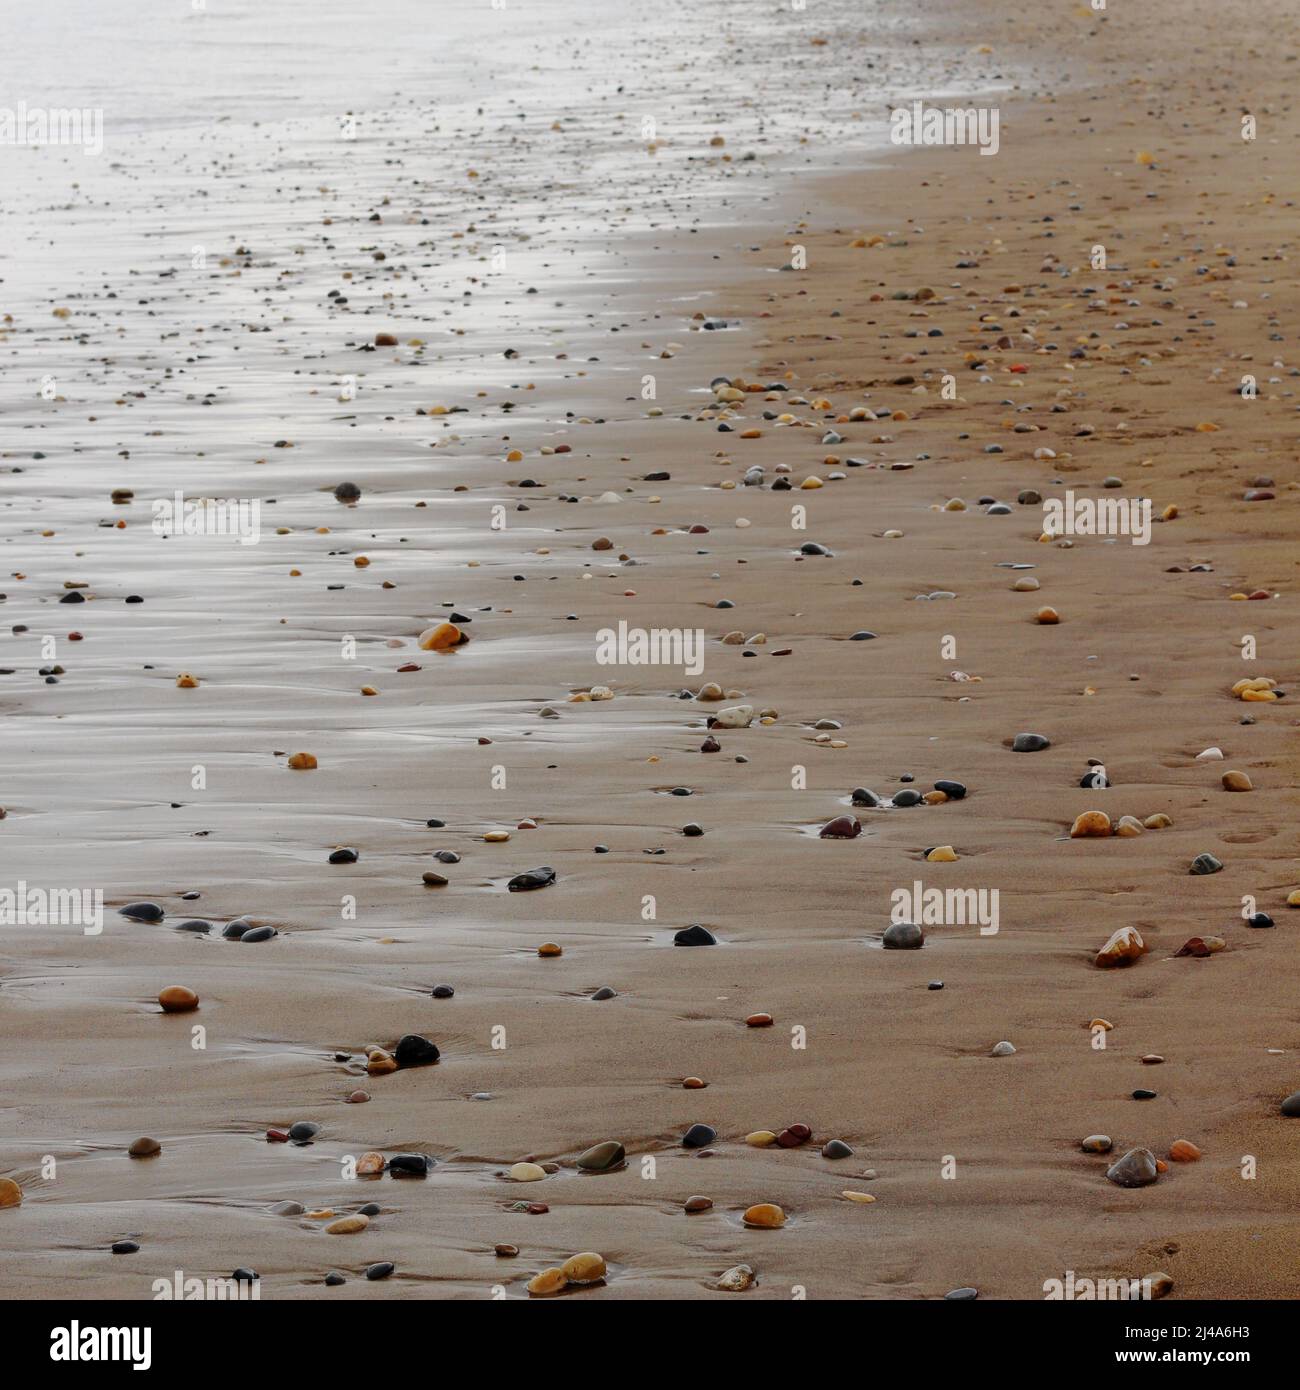 Pebbles of various types, shapes and sizes in the sand, with light reflecting on the water as it meets the shore. Sandsend beach, Yorkshire Stock Photo